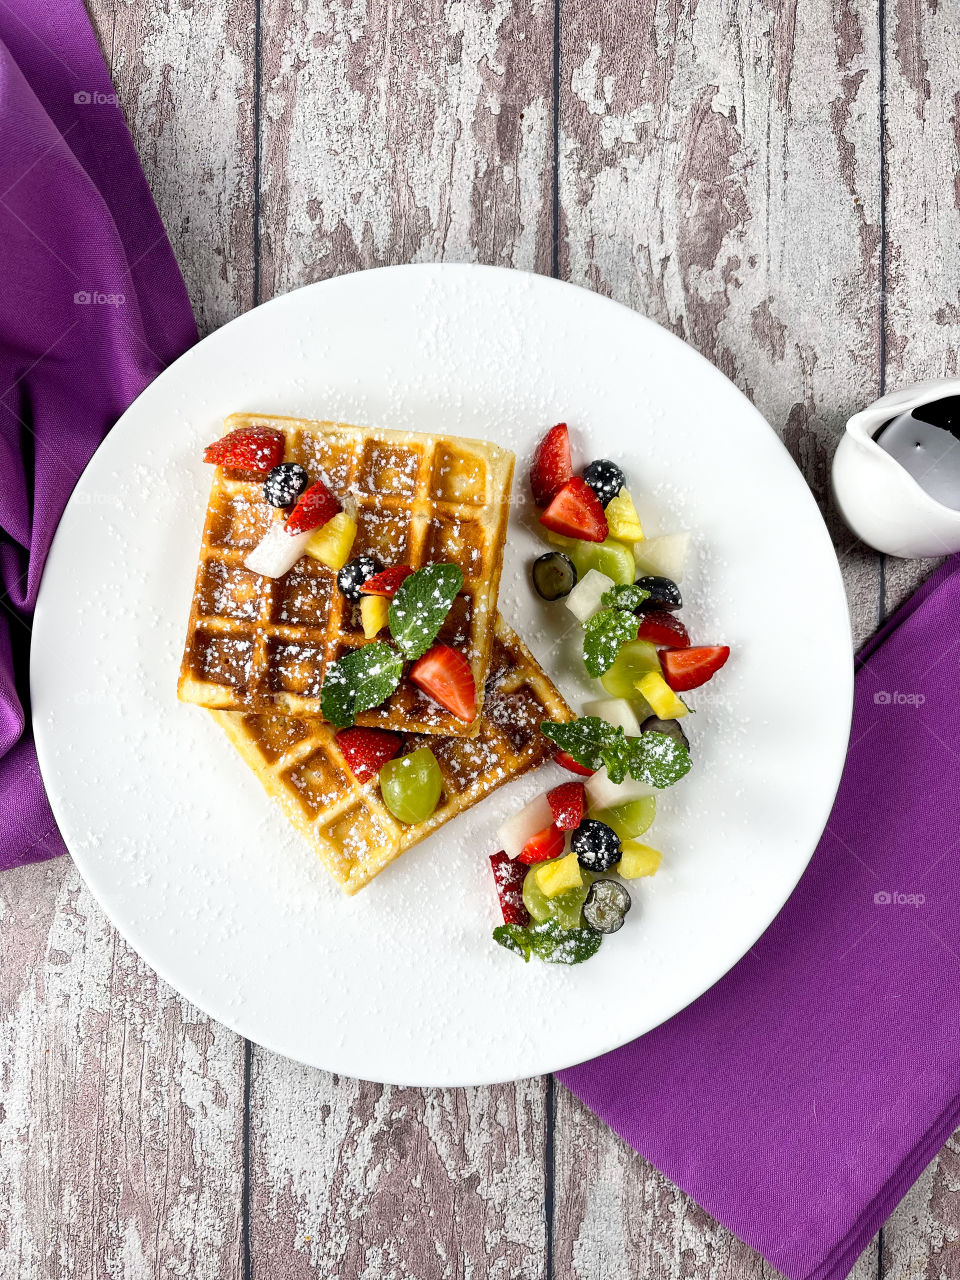 Belgia waffles with fruits on a plate